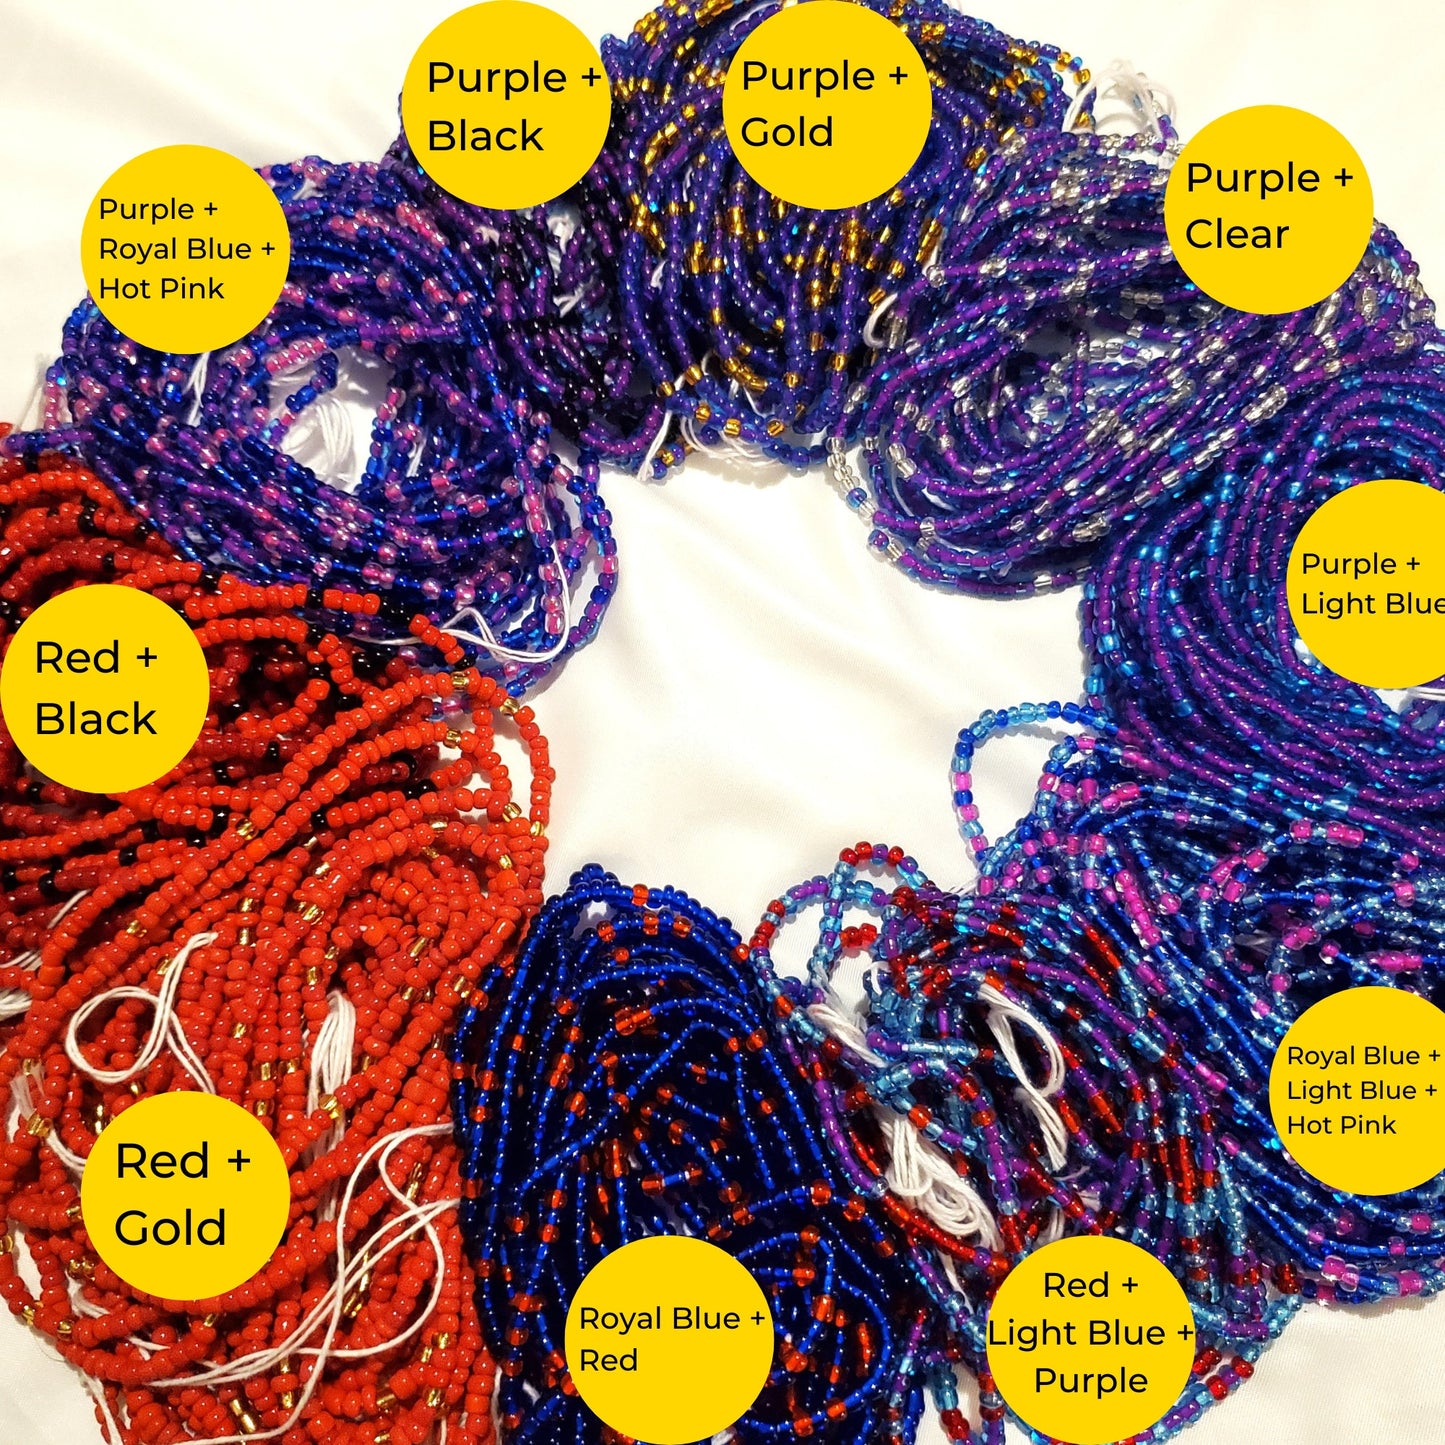 Purple and Red "Regal Vibes" Tie-On African Waist Beads